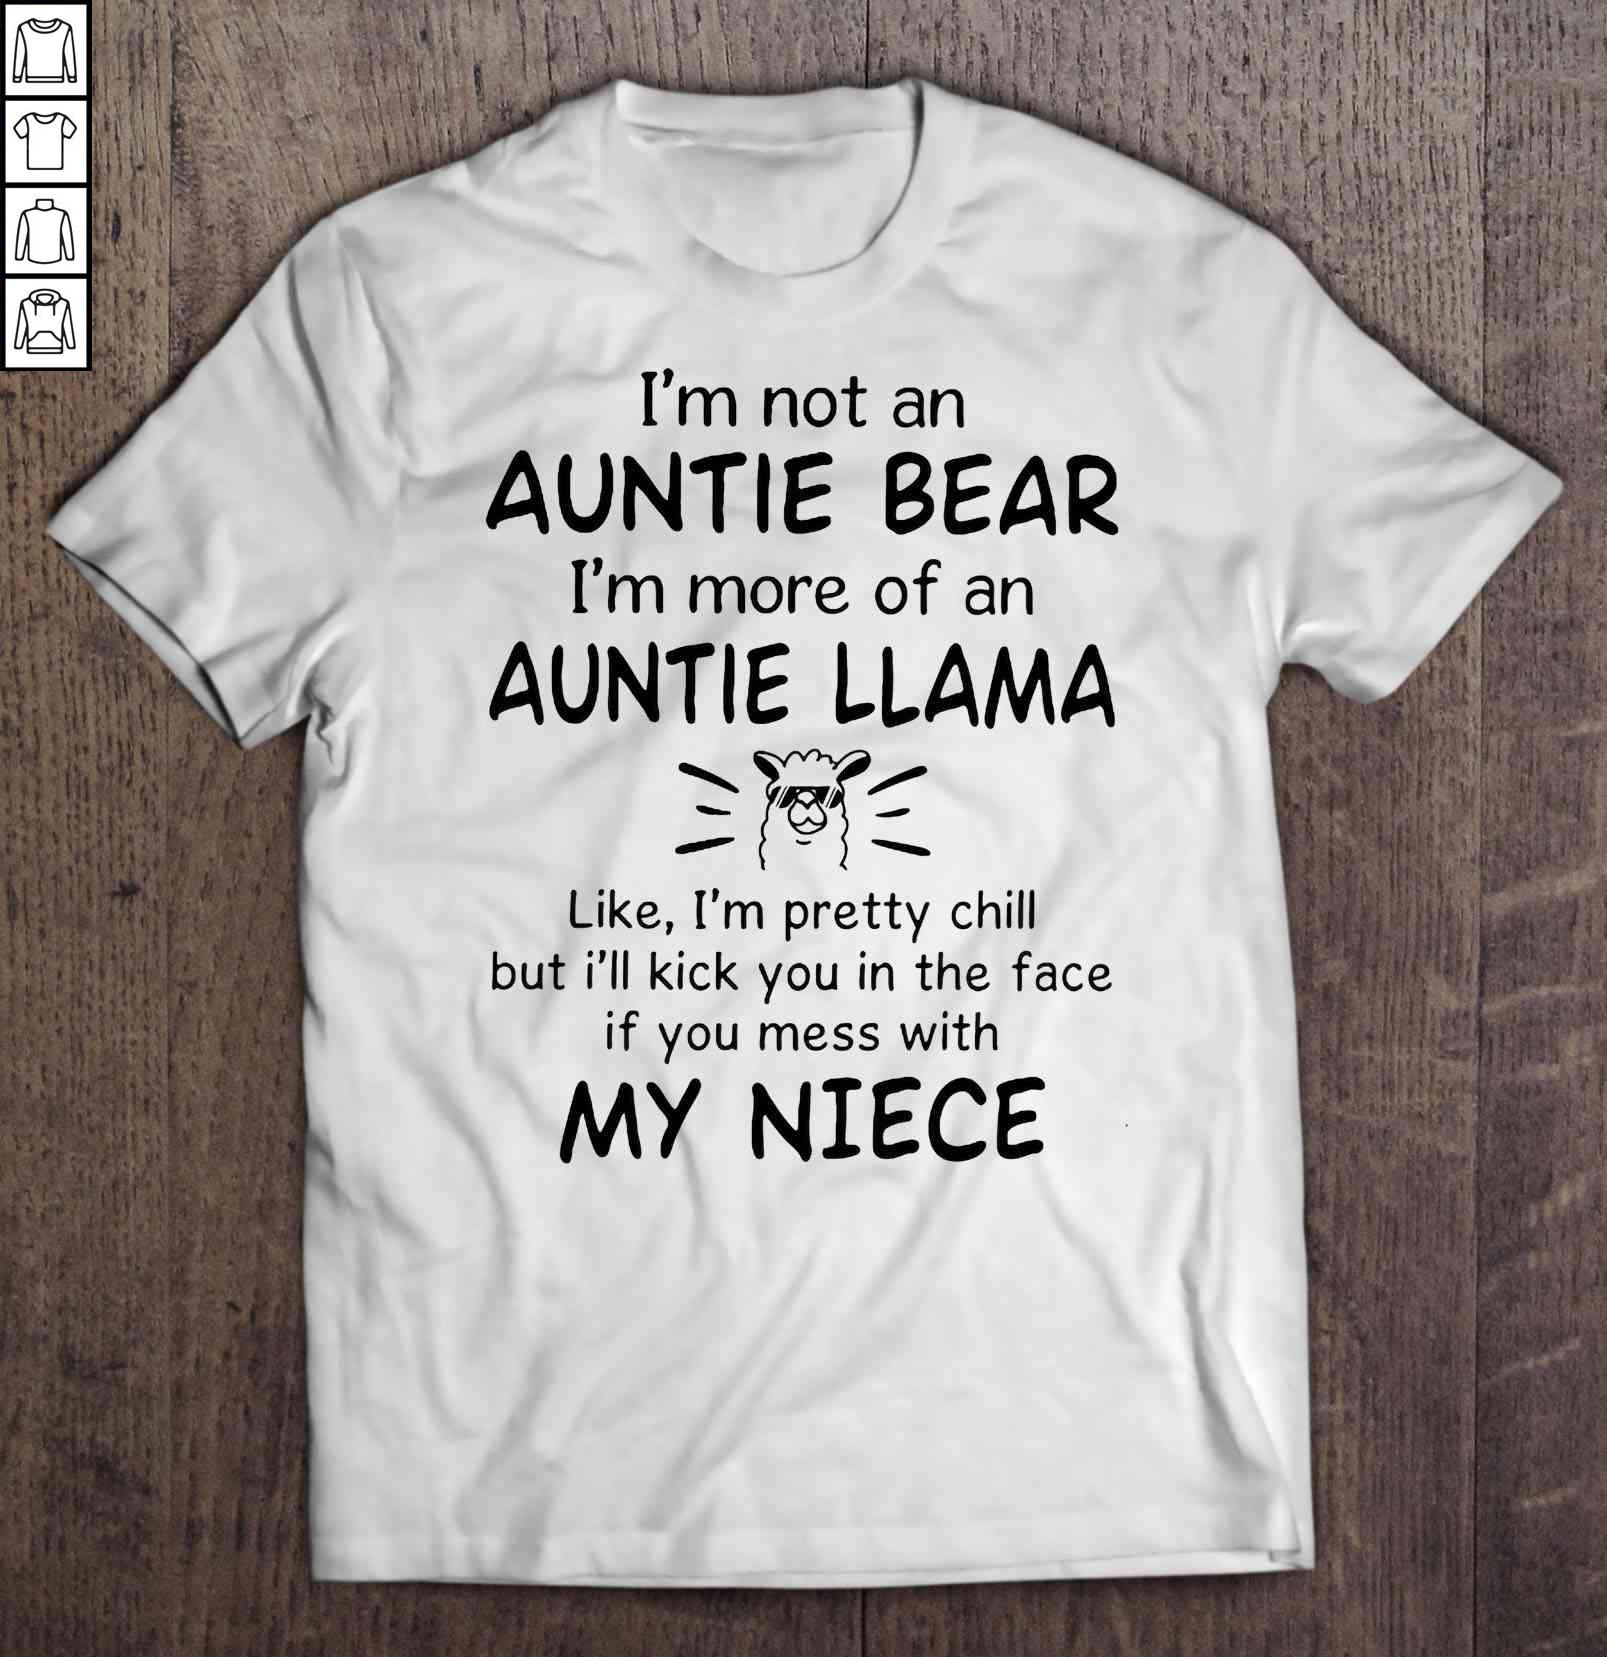 I’m Not An Auntie Bear I’m More Of An Auntie Llama Like I’m Pretty Chill Glasses Llama Shirt